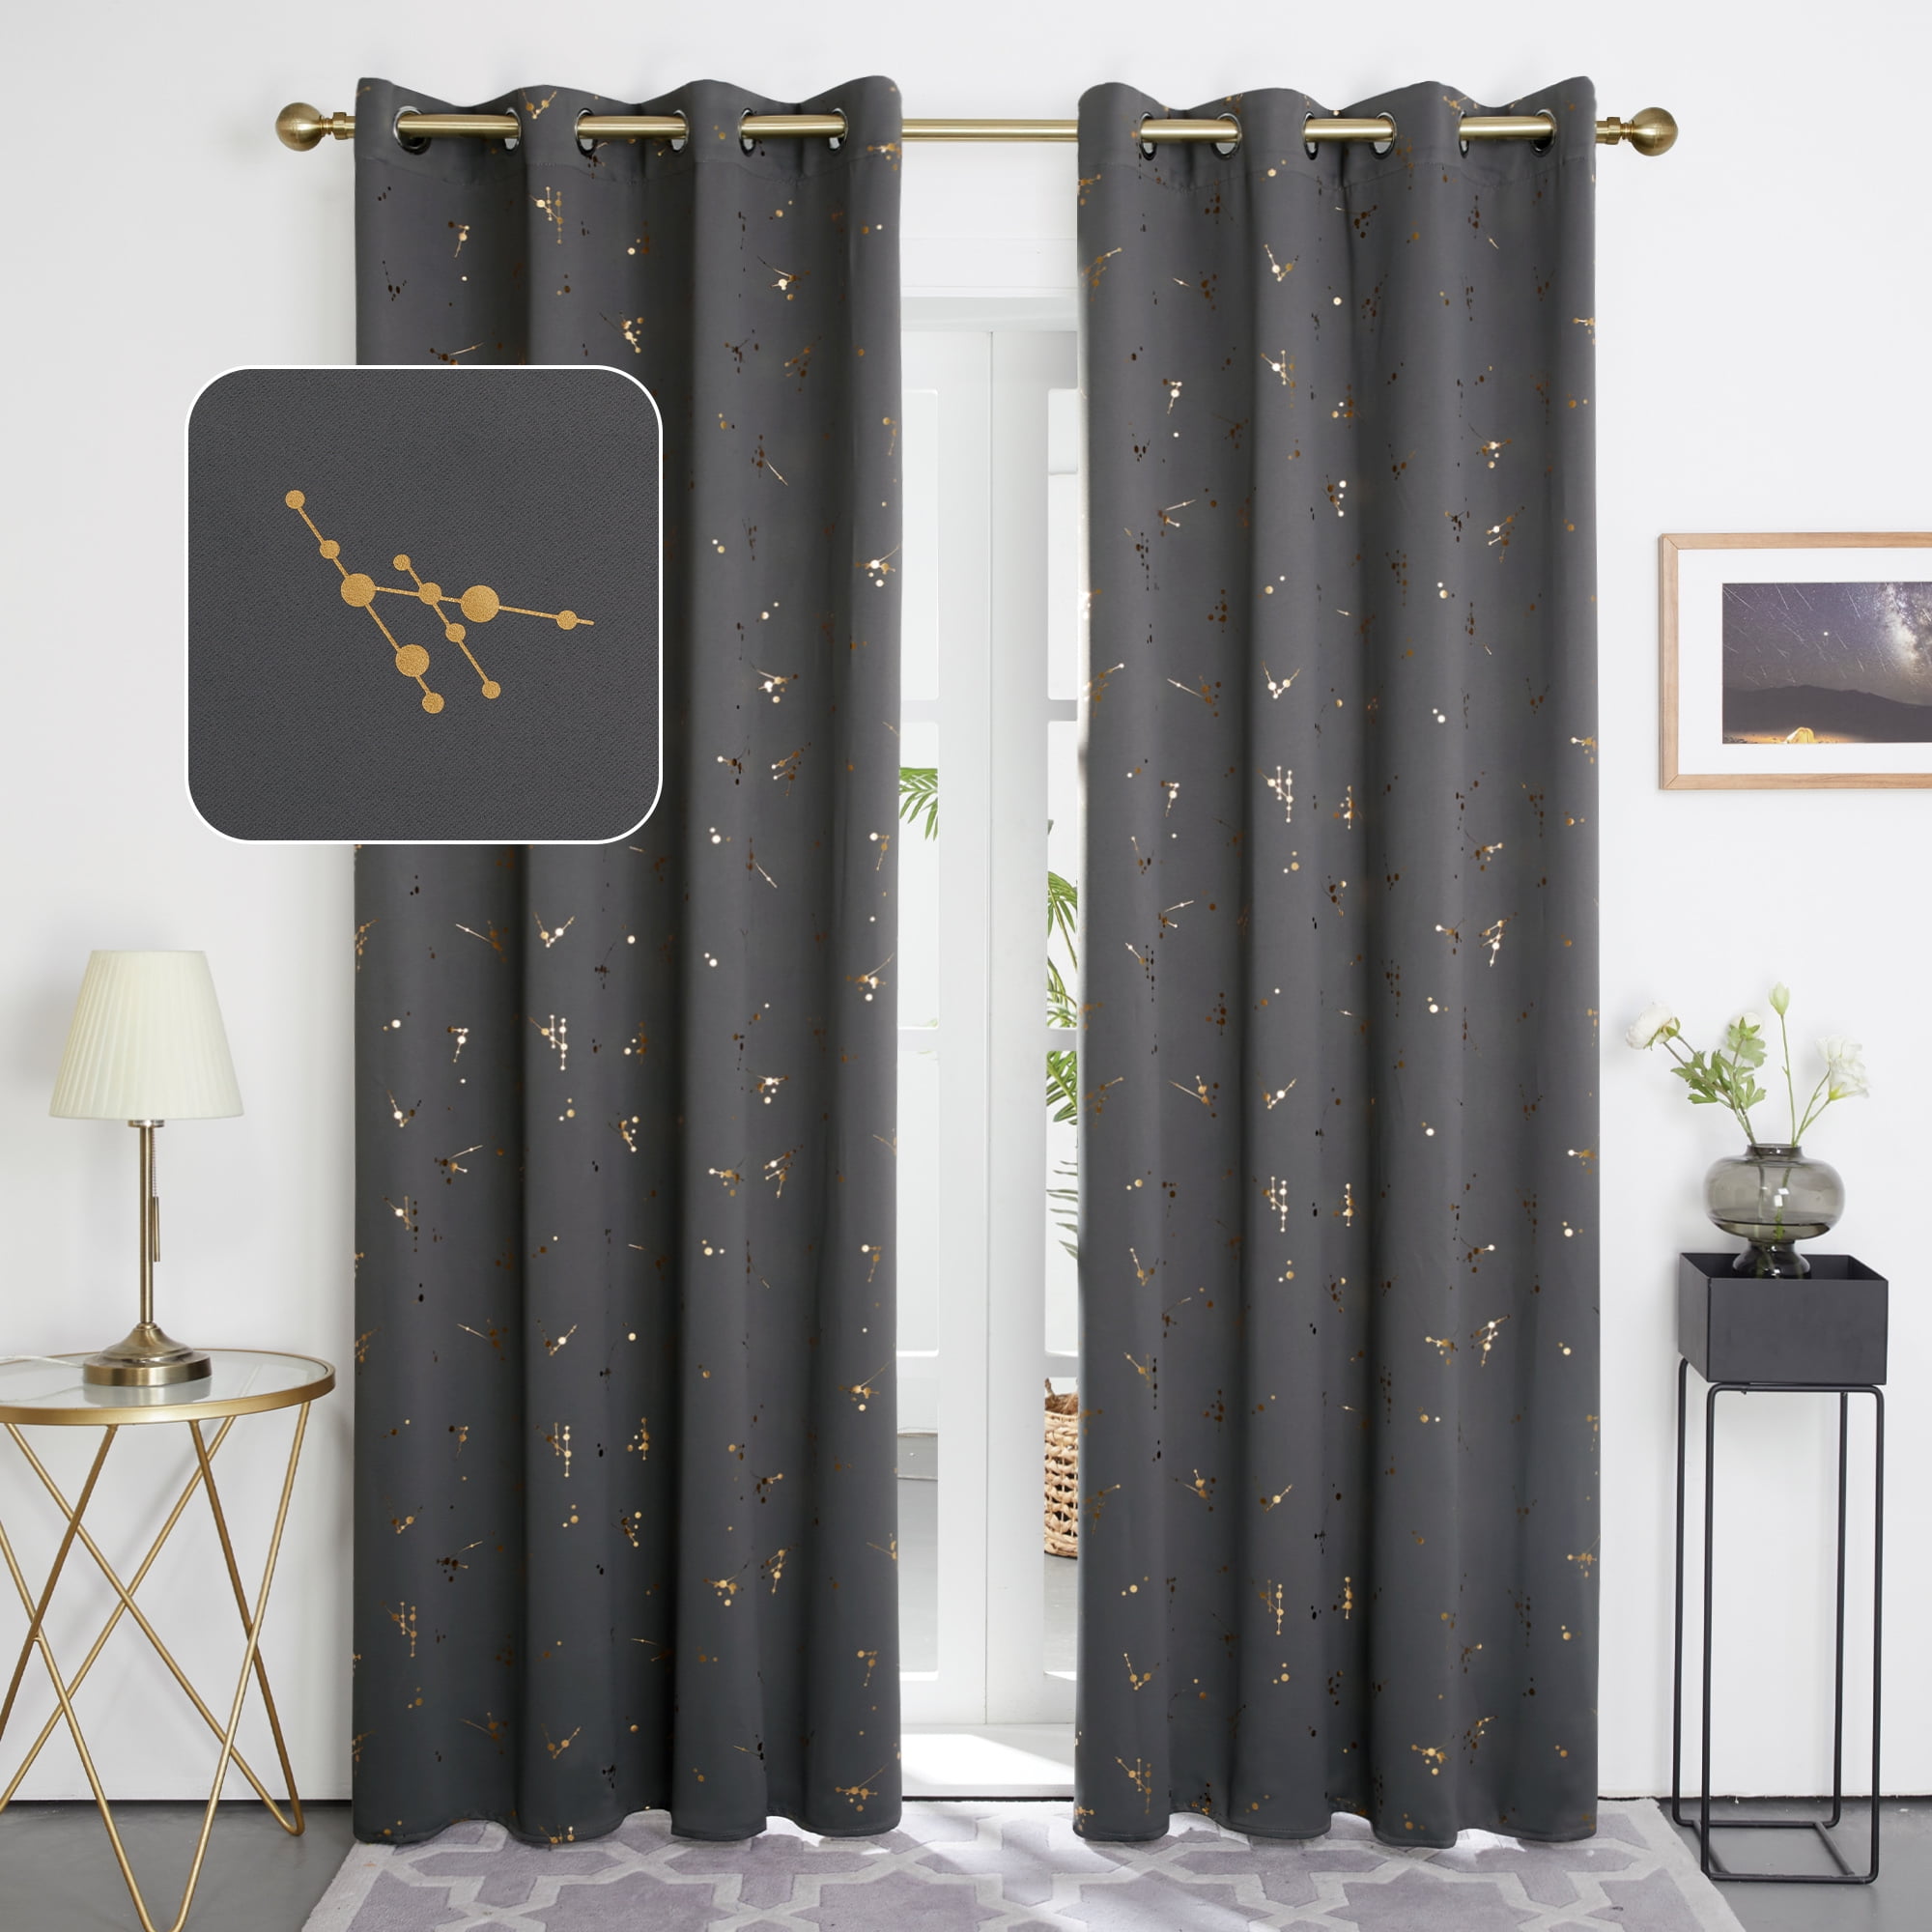 Deconovo Short Window Curtains with Foil Print Gold Star Grommet White Sheer Curtains for Bedroom 52x45 Inch 2 Panels 